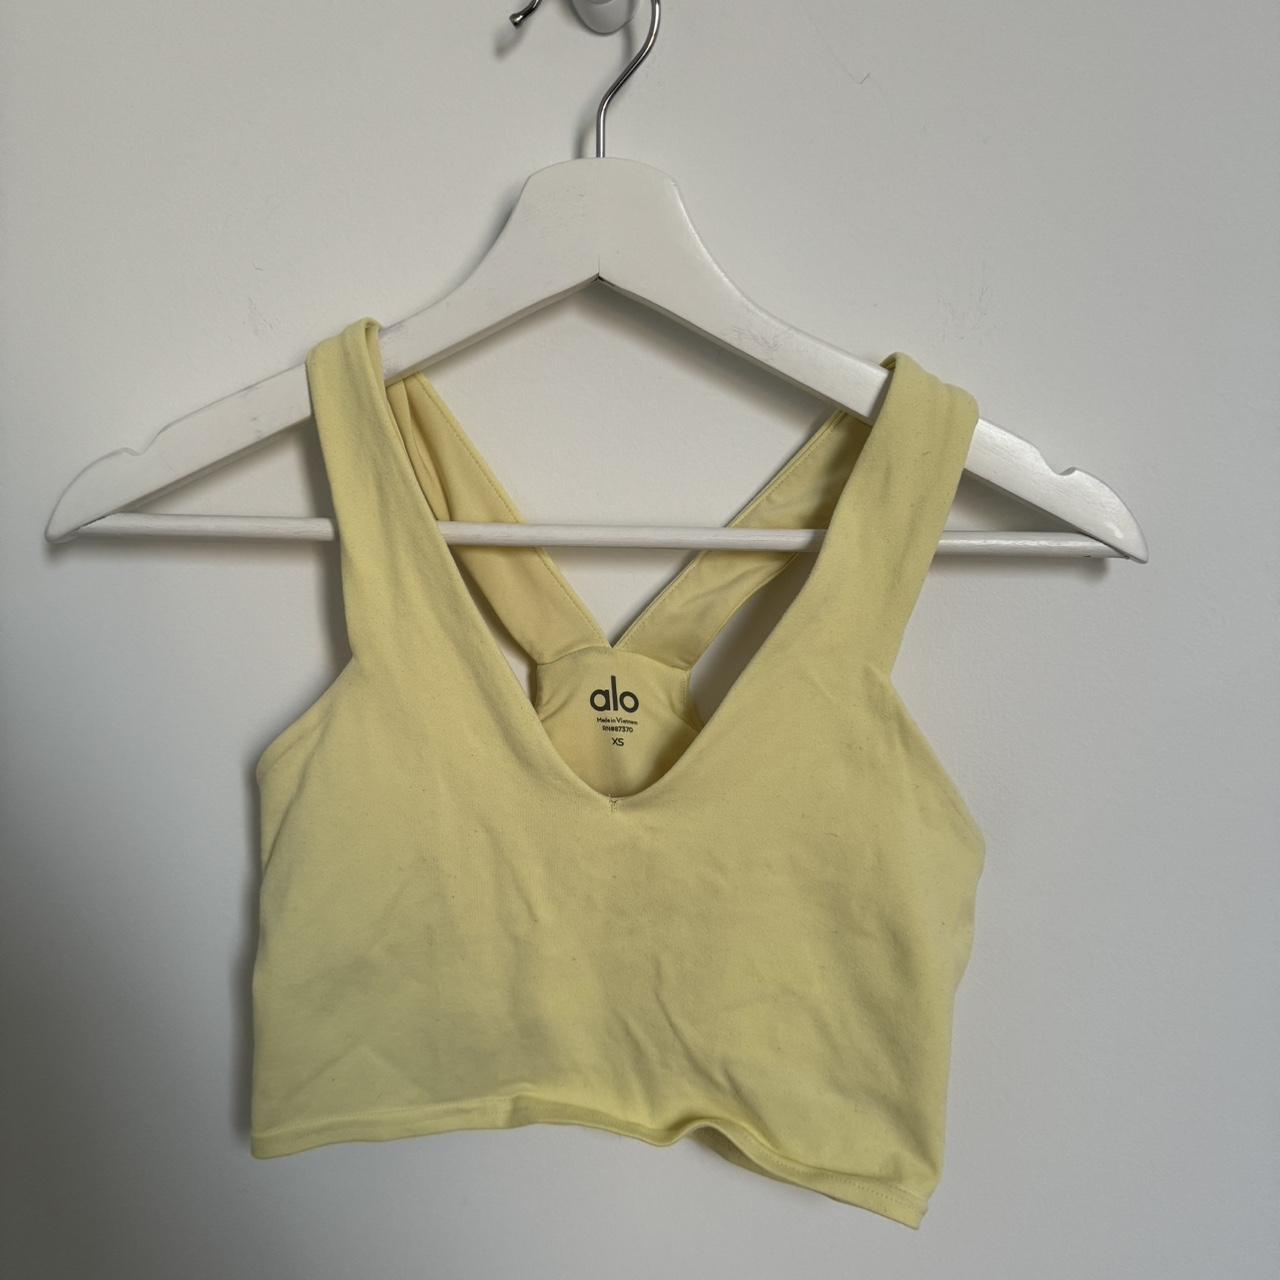 small ribbed gray sports bra worn a few times to - Depop